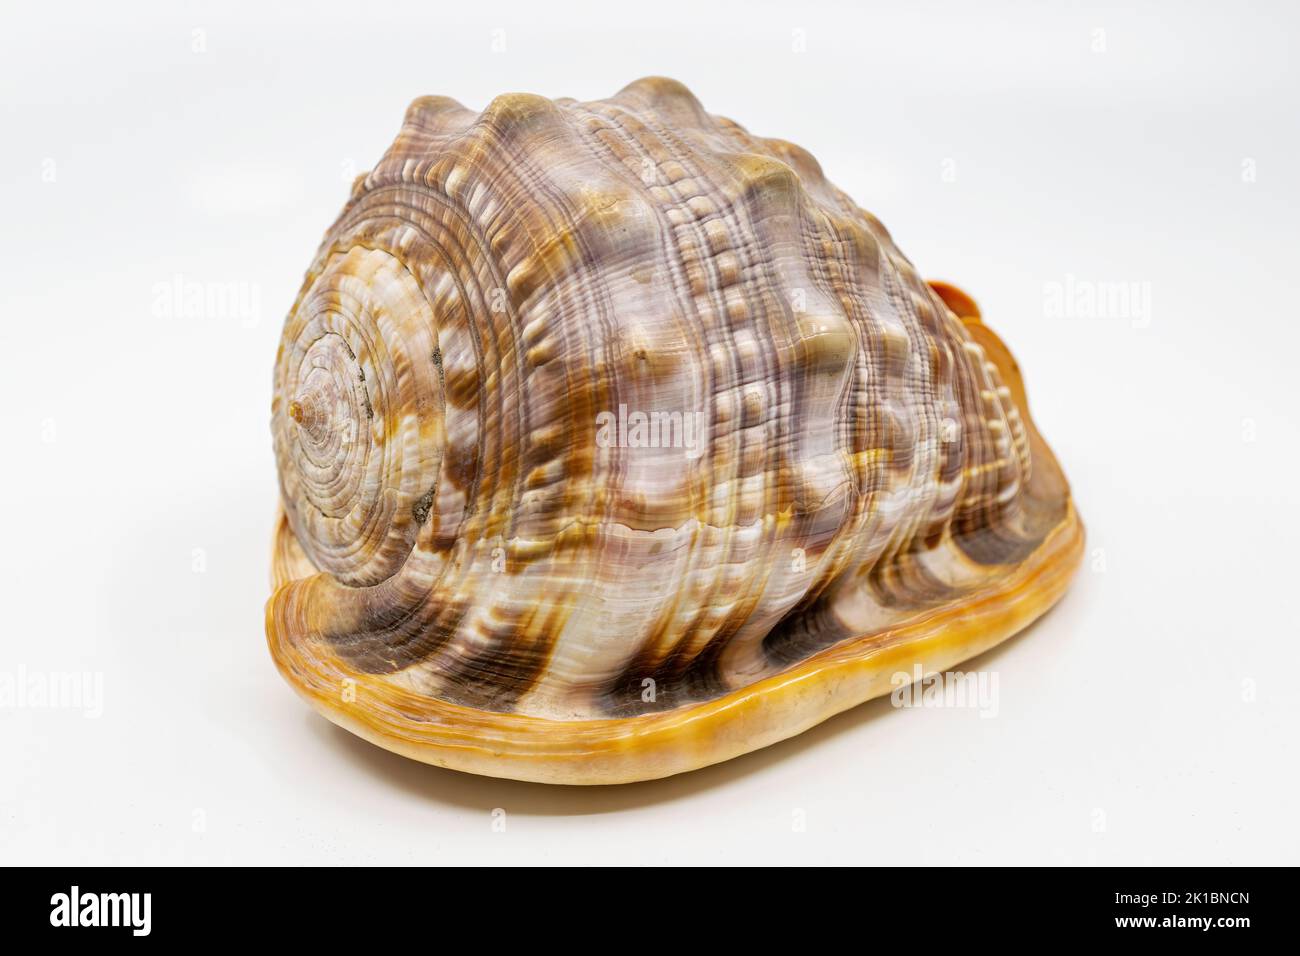 Shell of a red helmet snail on a white background, Cypraecassis rufa. Stock Photo